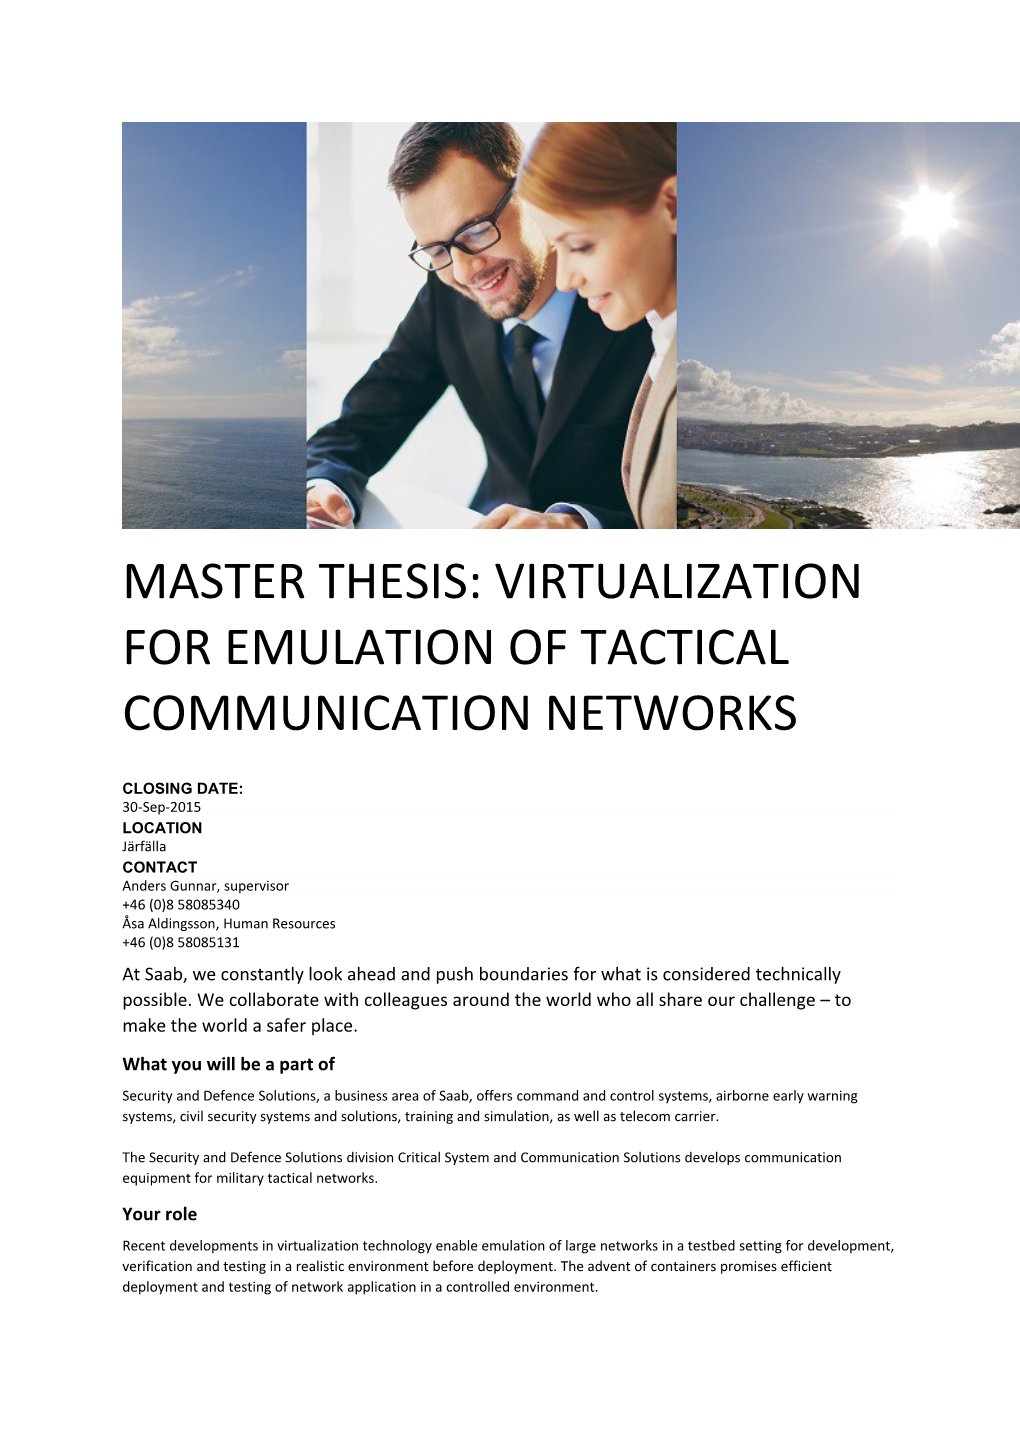 Master Thesis: Virtualization for Emulation of Tactical Communication Networks